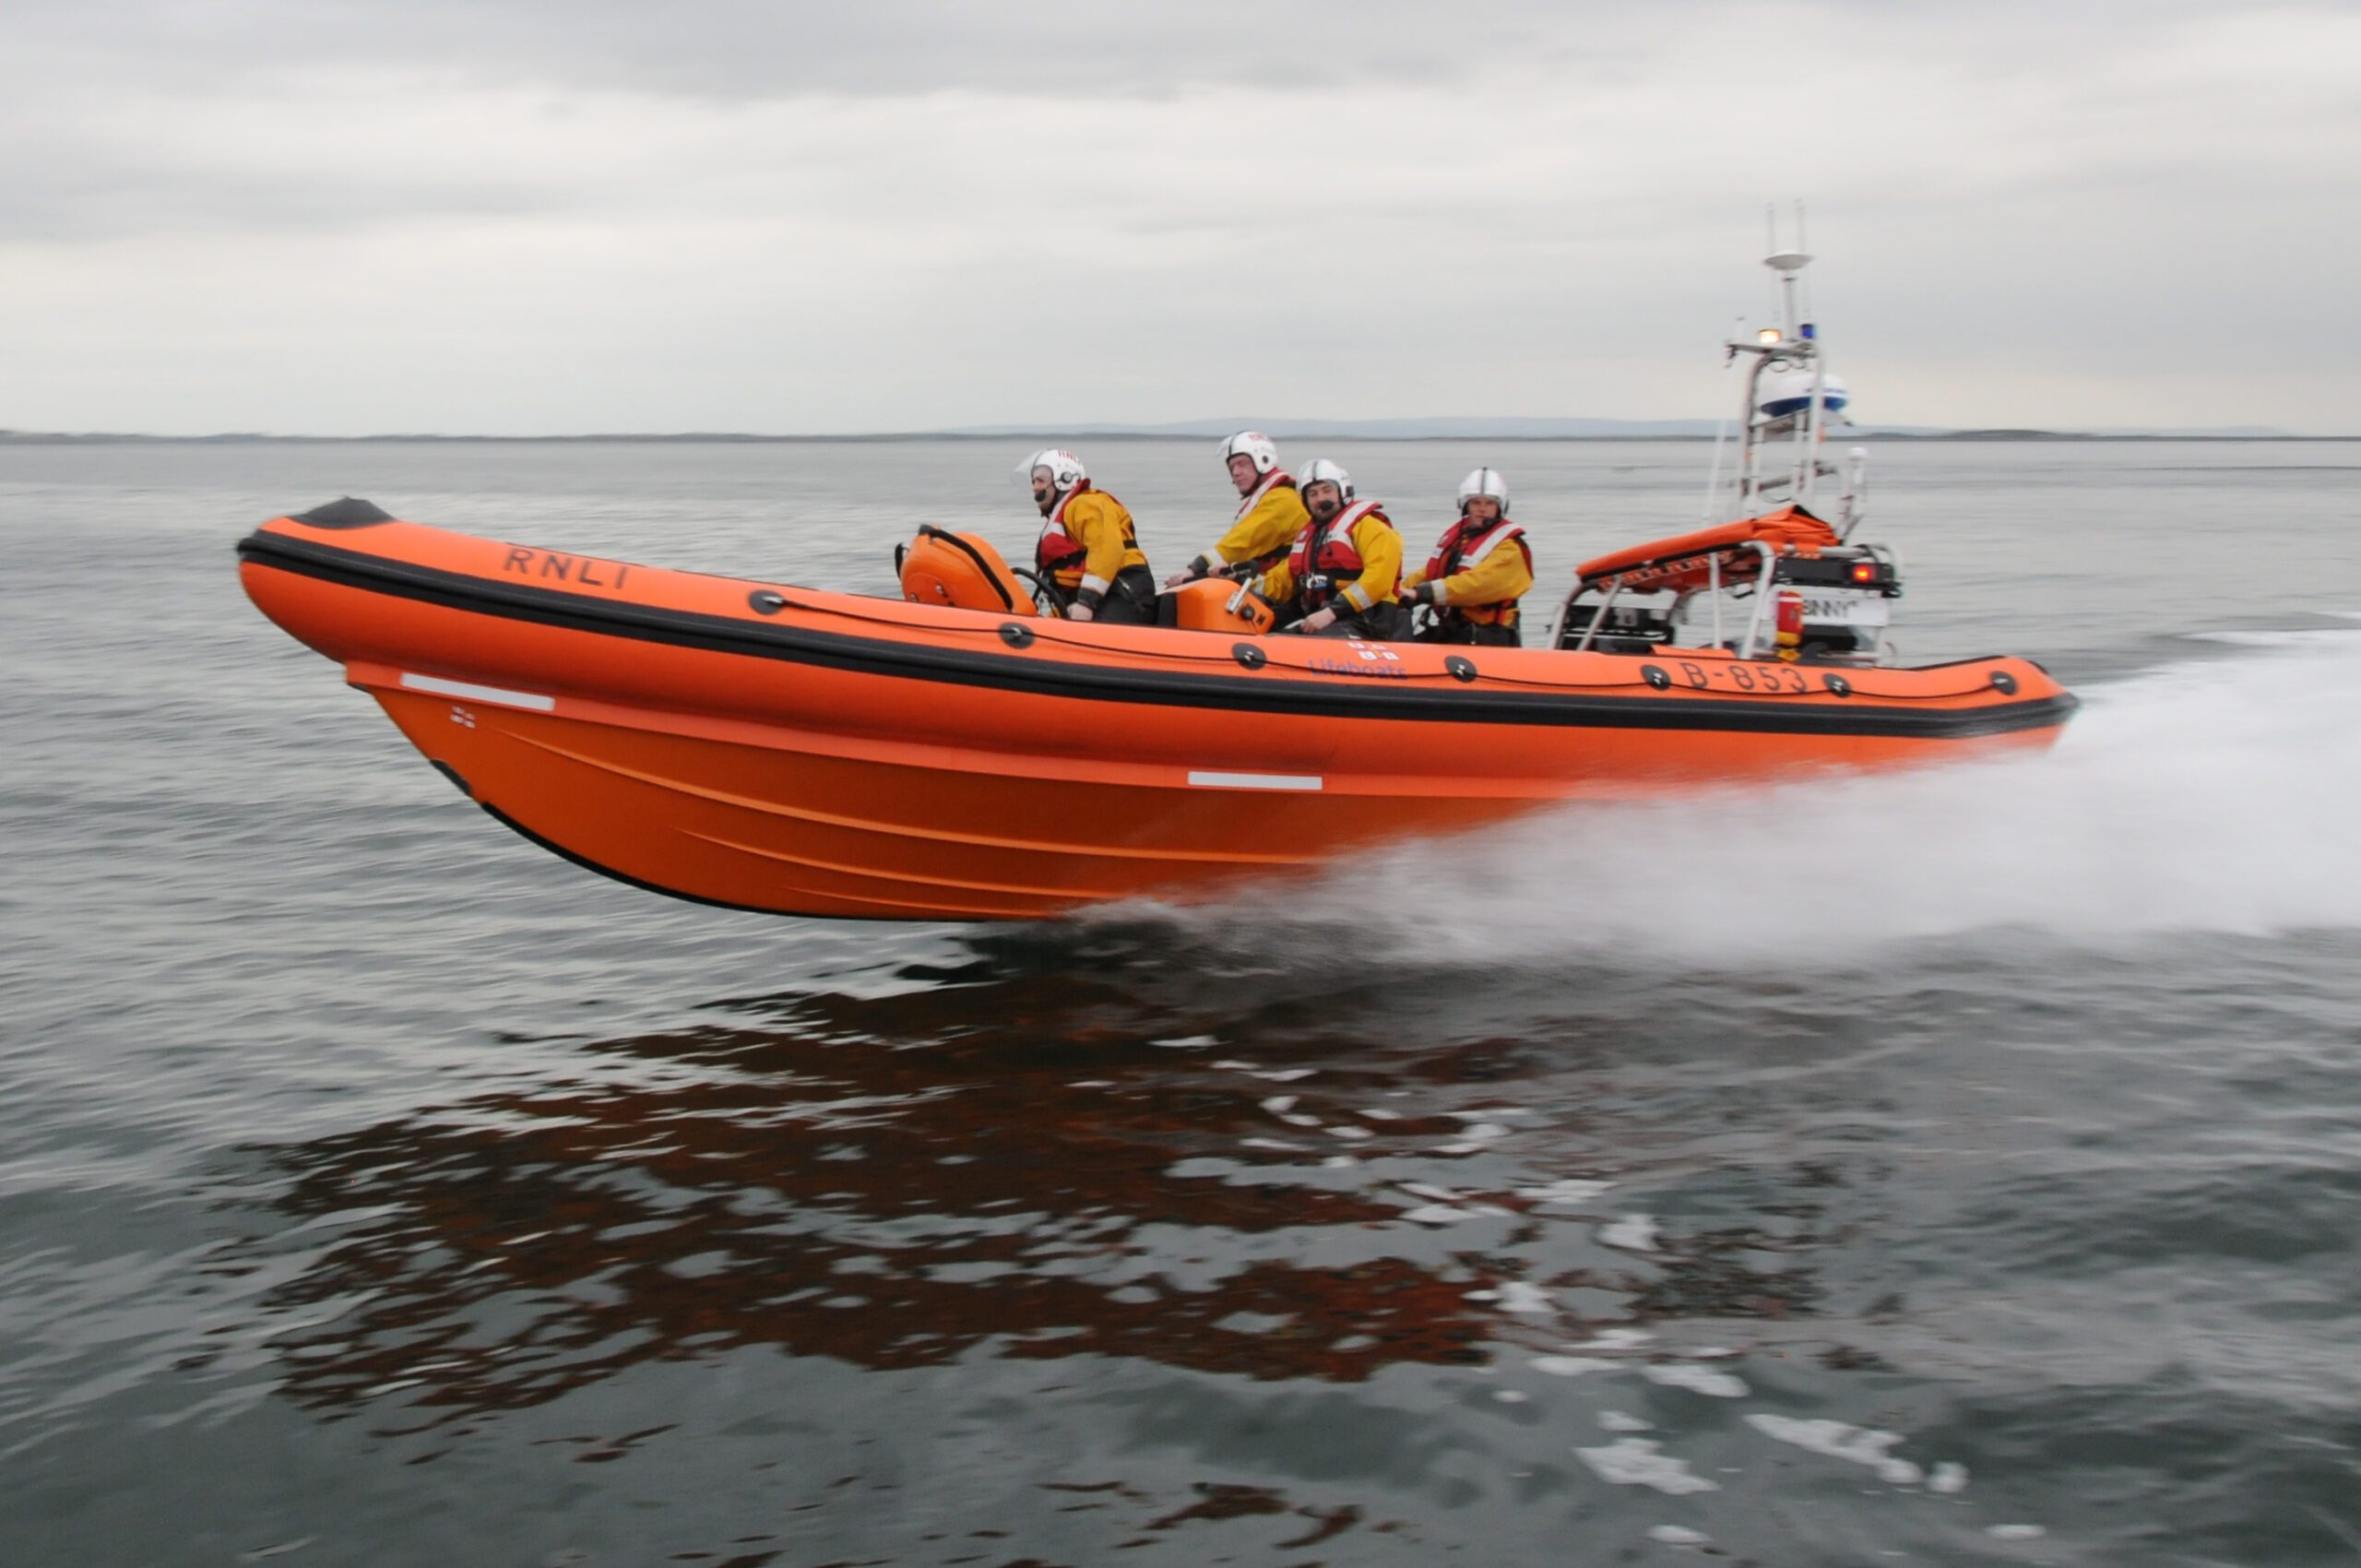 GALWAY SHOPPERS INVITED TO SAMPLE SOUP FOR RNLI FUNDRAISER